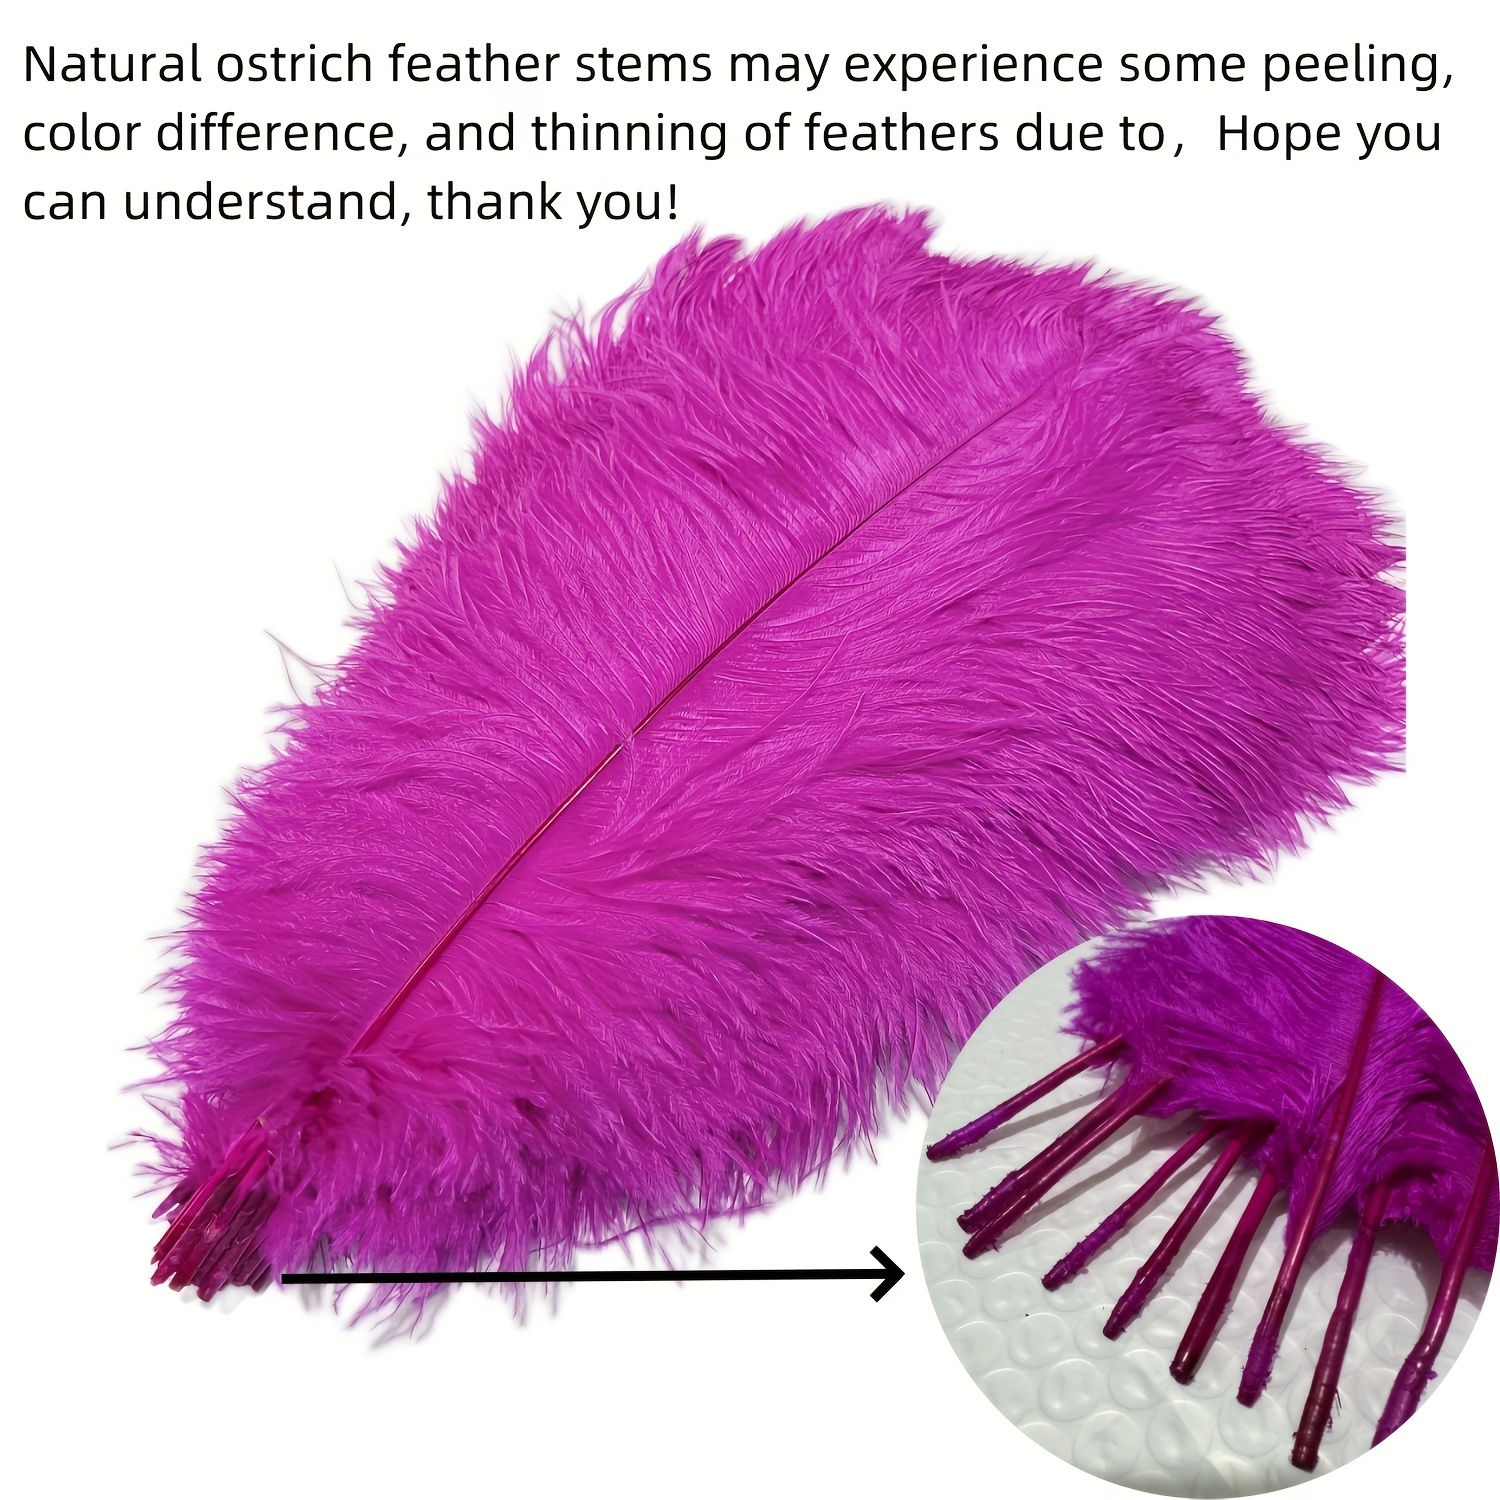 15 Red Feather Plume Mardi Gras Decoration Accessory